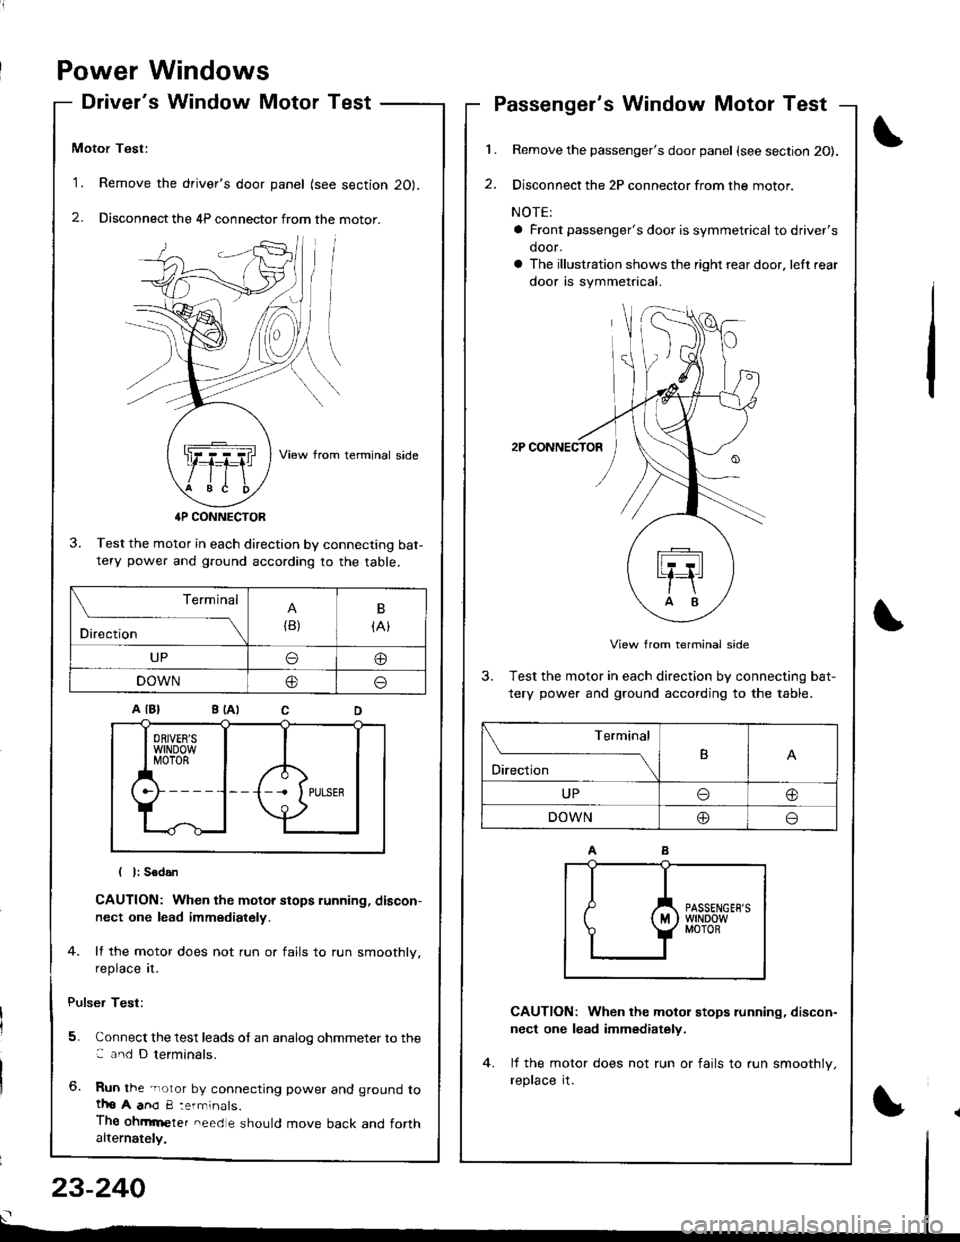 HONDA INTEGRA 1998 4.G Workshop Manual Power Windows
Drivers Window Motor Test
Motor Test:
1. Remove the drivers door panel (see section 20).
2. Disconnect the 4P connector from the motor.
View from terminal side
4P CONNECTOR
3. Test th